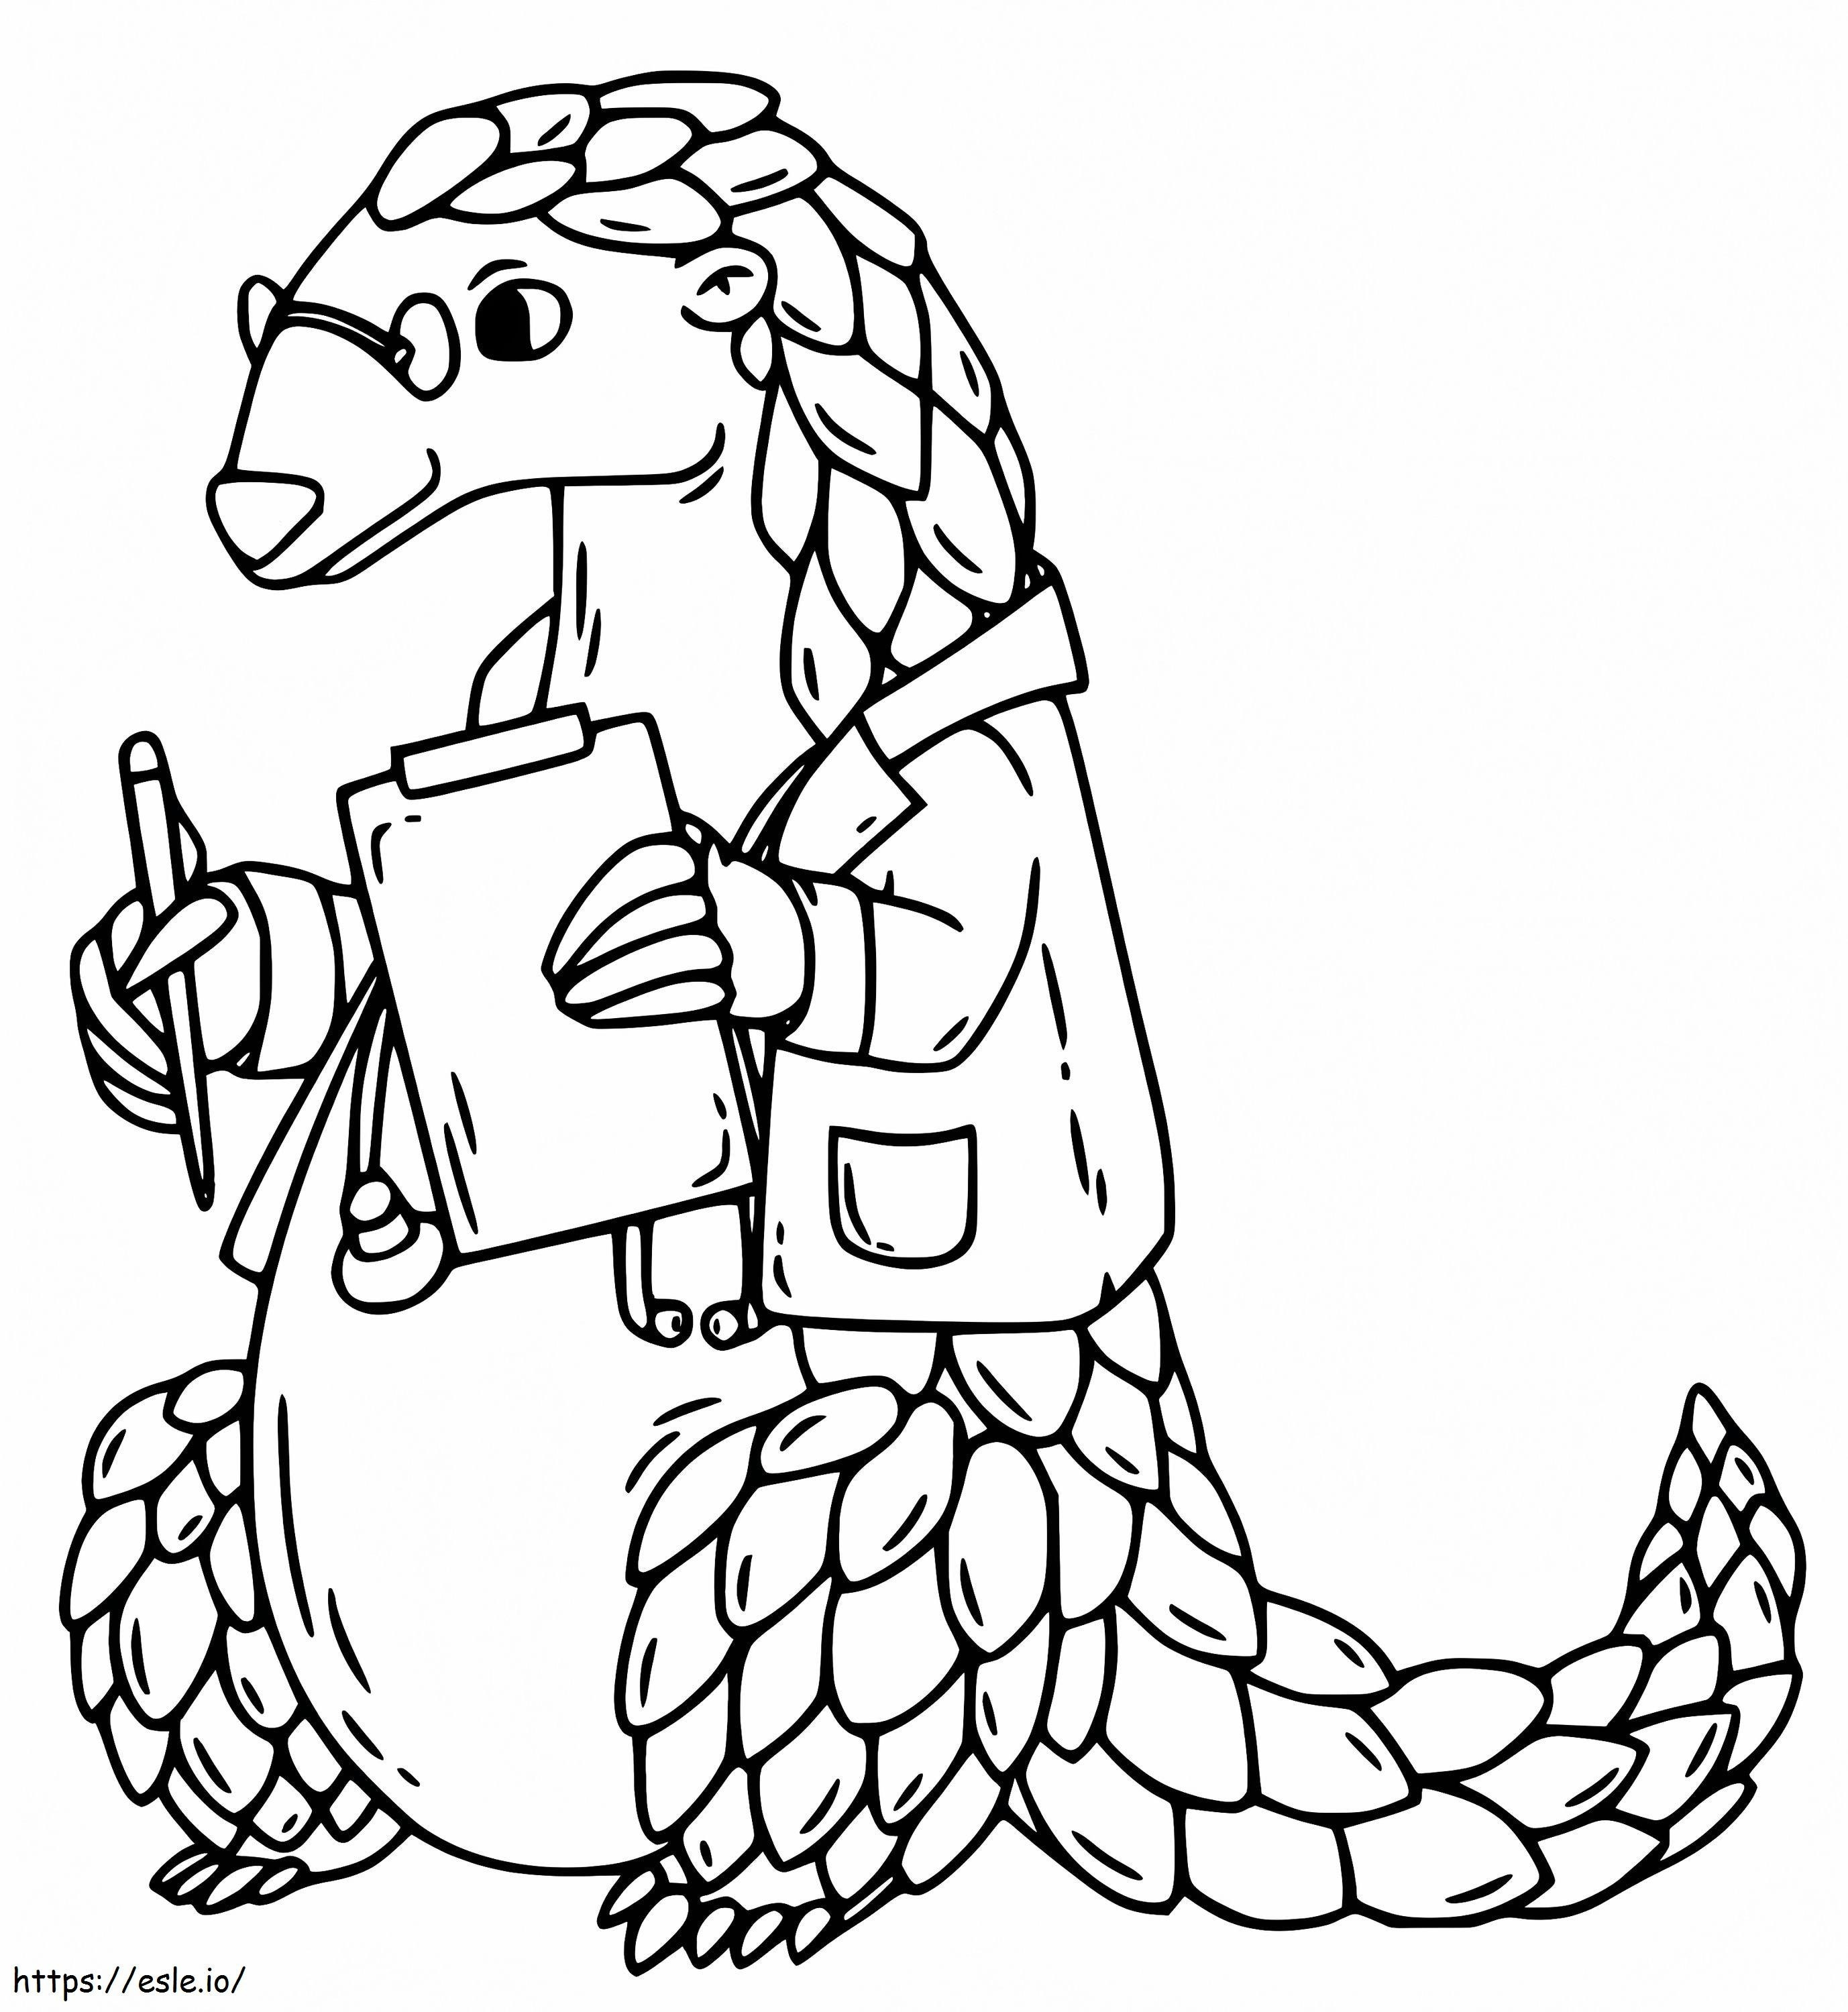 Doctor Pangolin coloring page